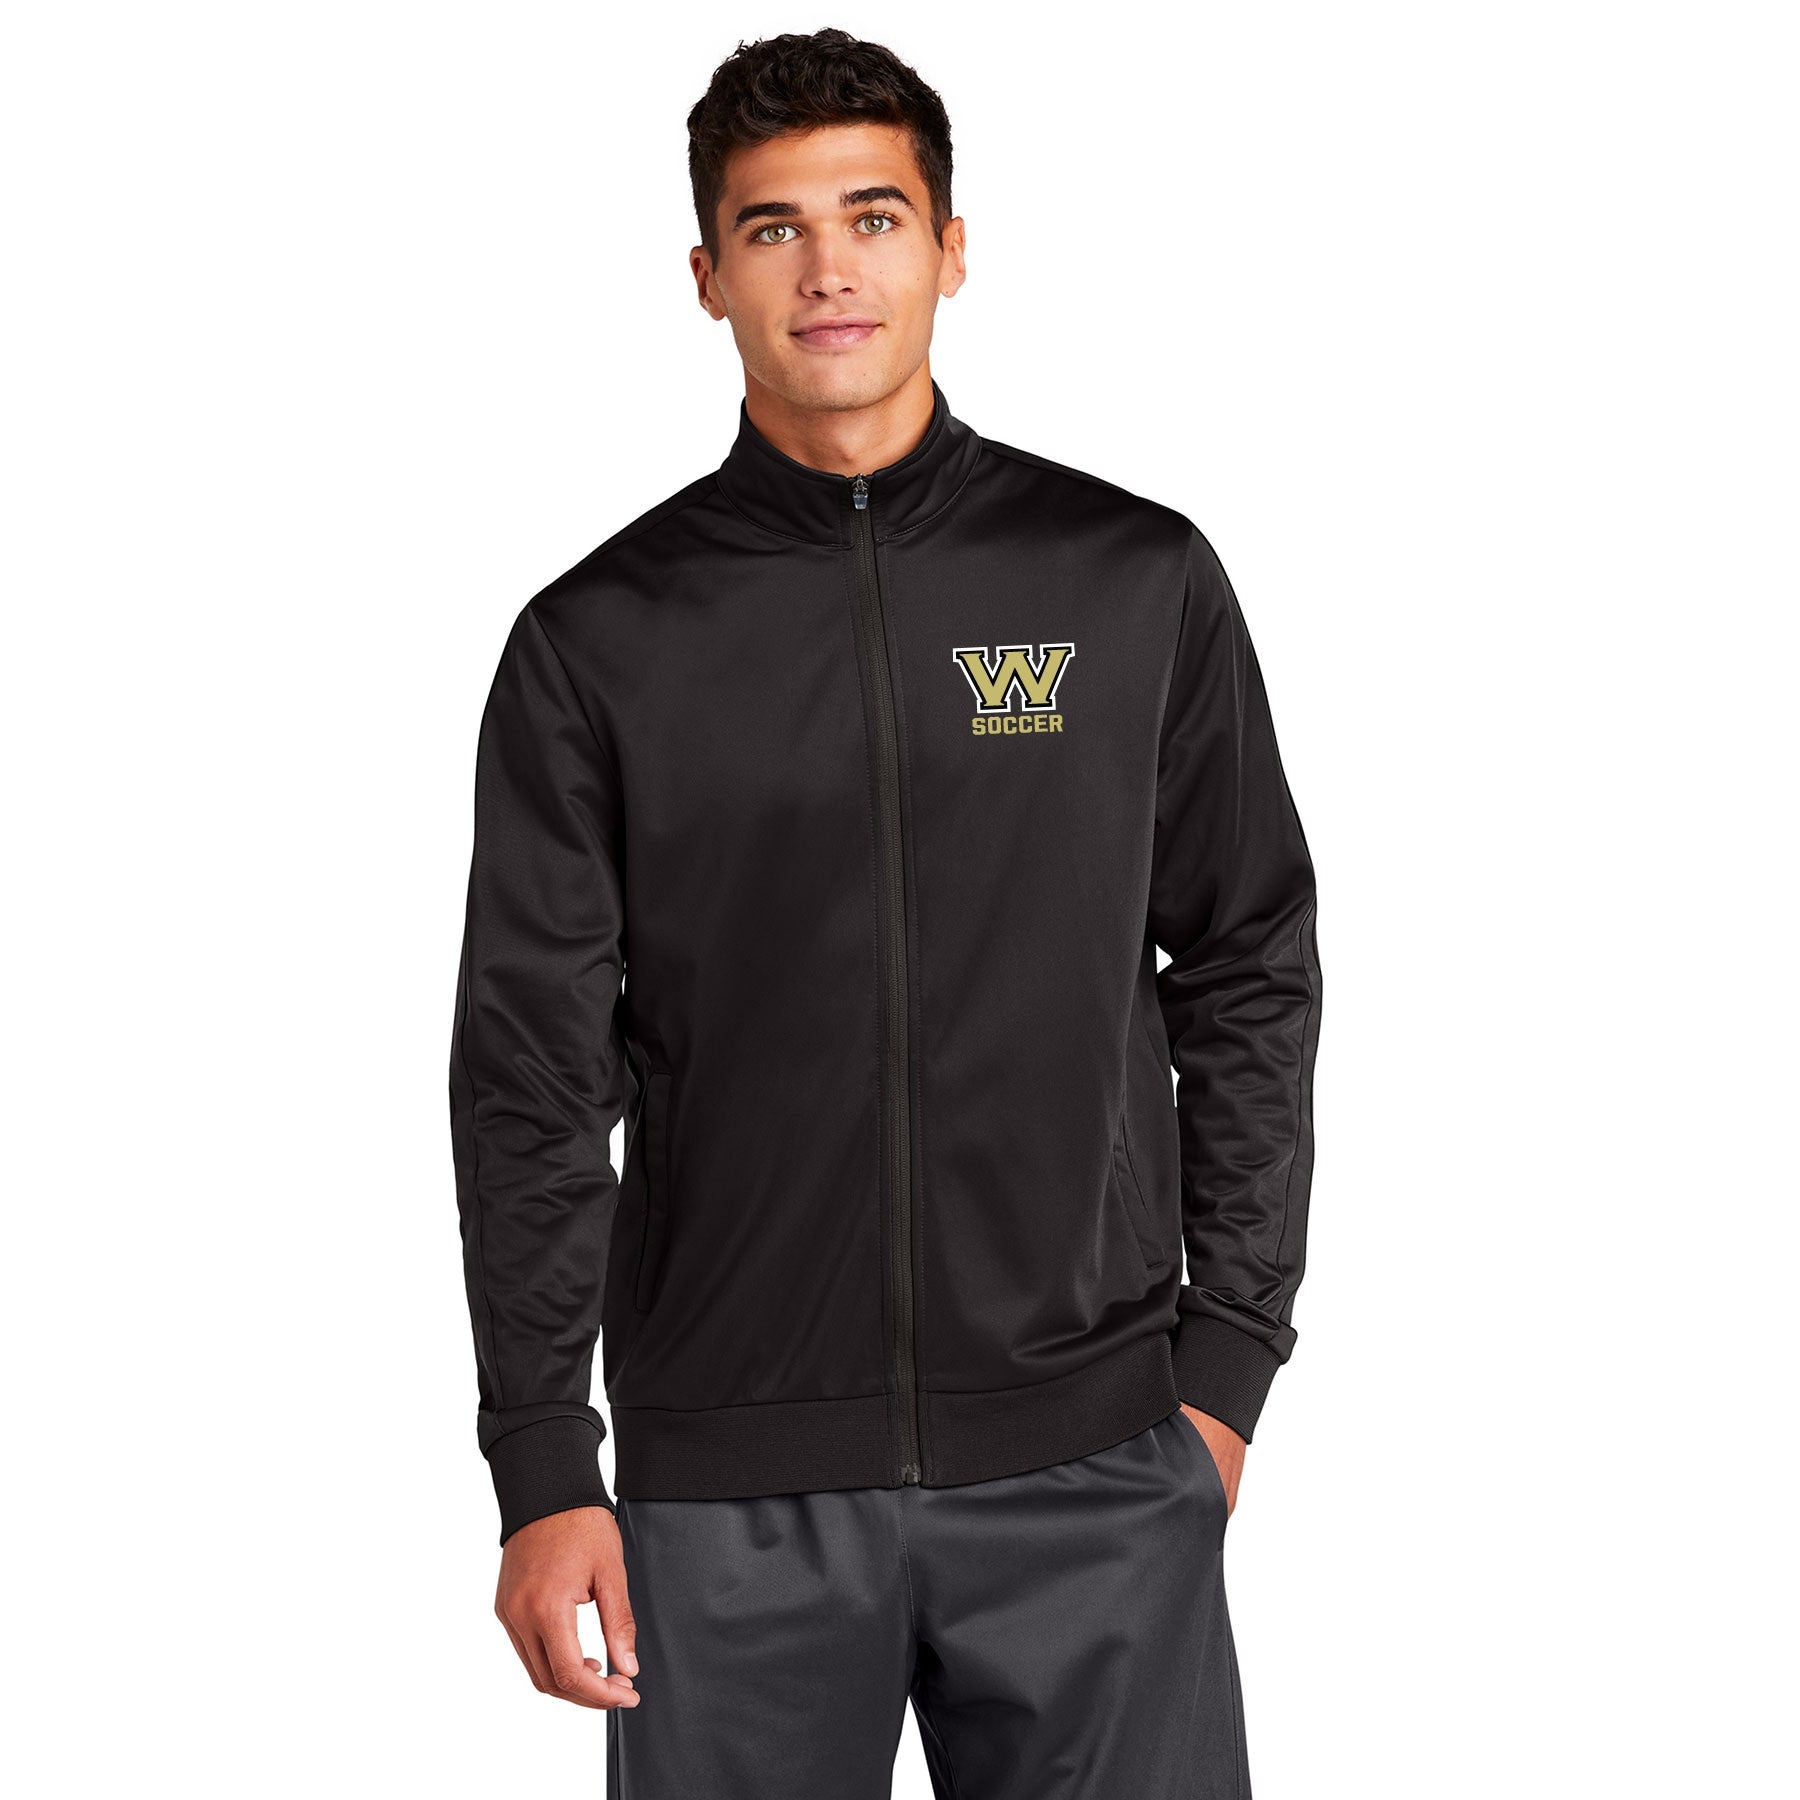 WESTVIEW SOCCER EMBROIDERED JACKET